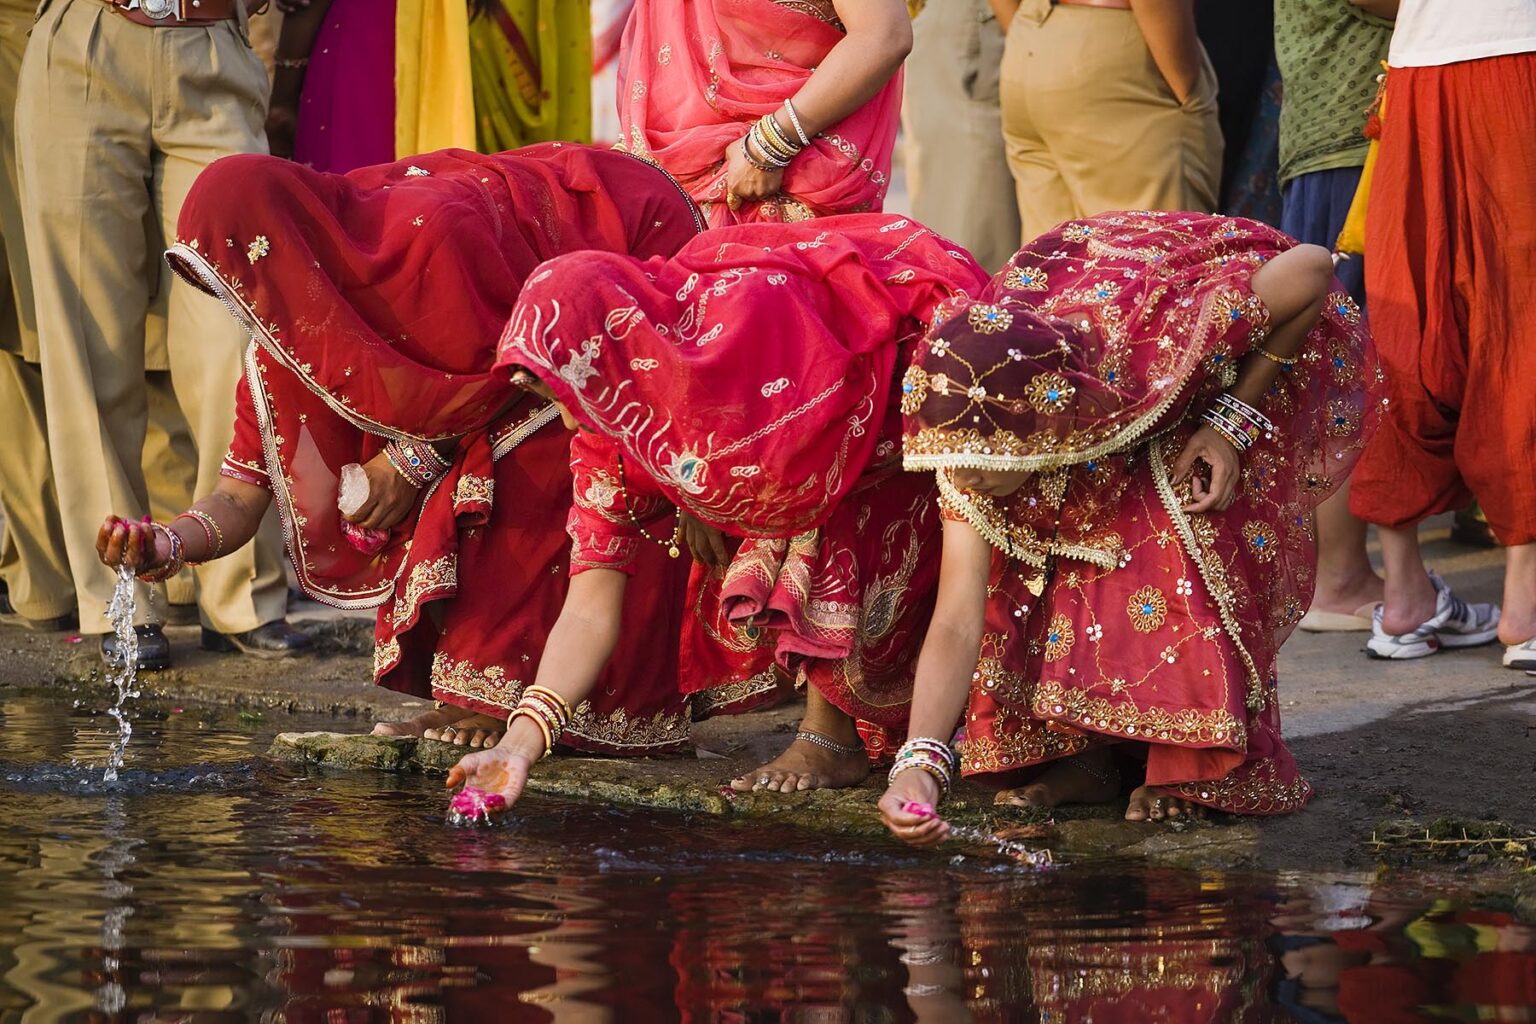 Rajasthani women wash rose petals at the GANGAUR GHAT on the shore of PICHOLA LAKE for the GANGAUR FESTIVAL or MEWAR FESTIVAL - UDAIPUR, RAJASTHAN, INDIA